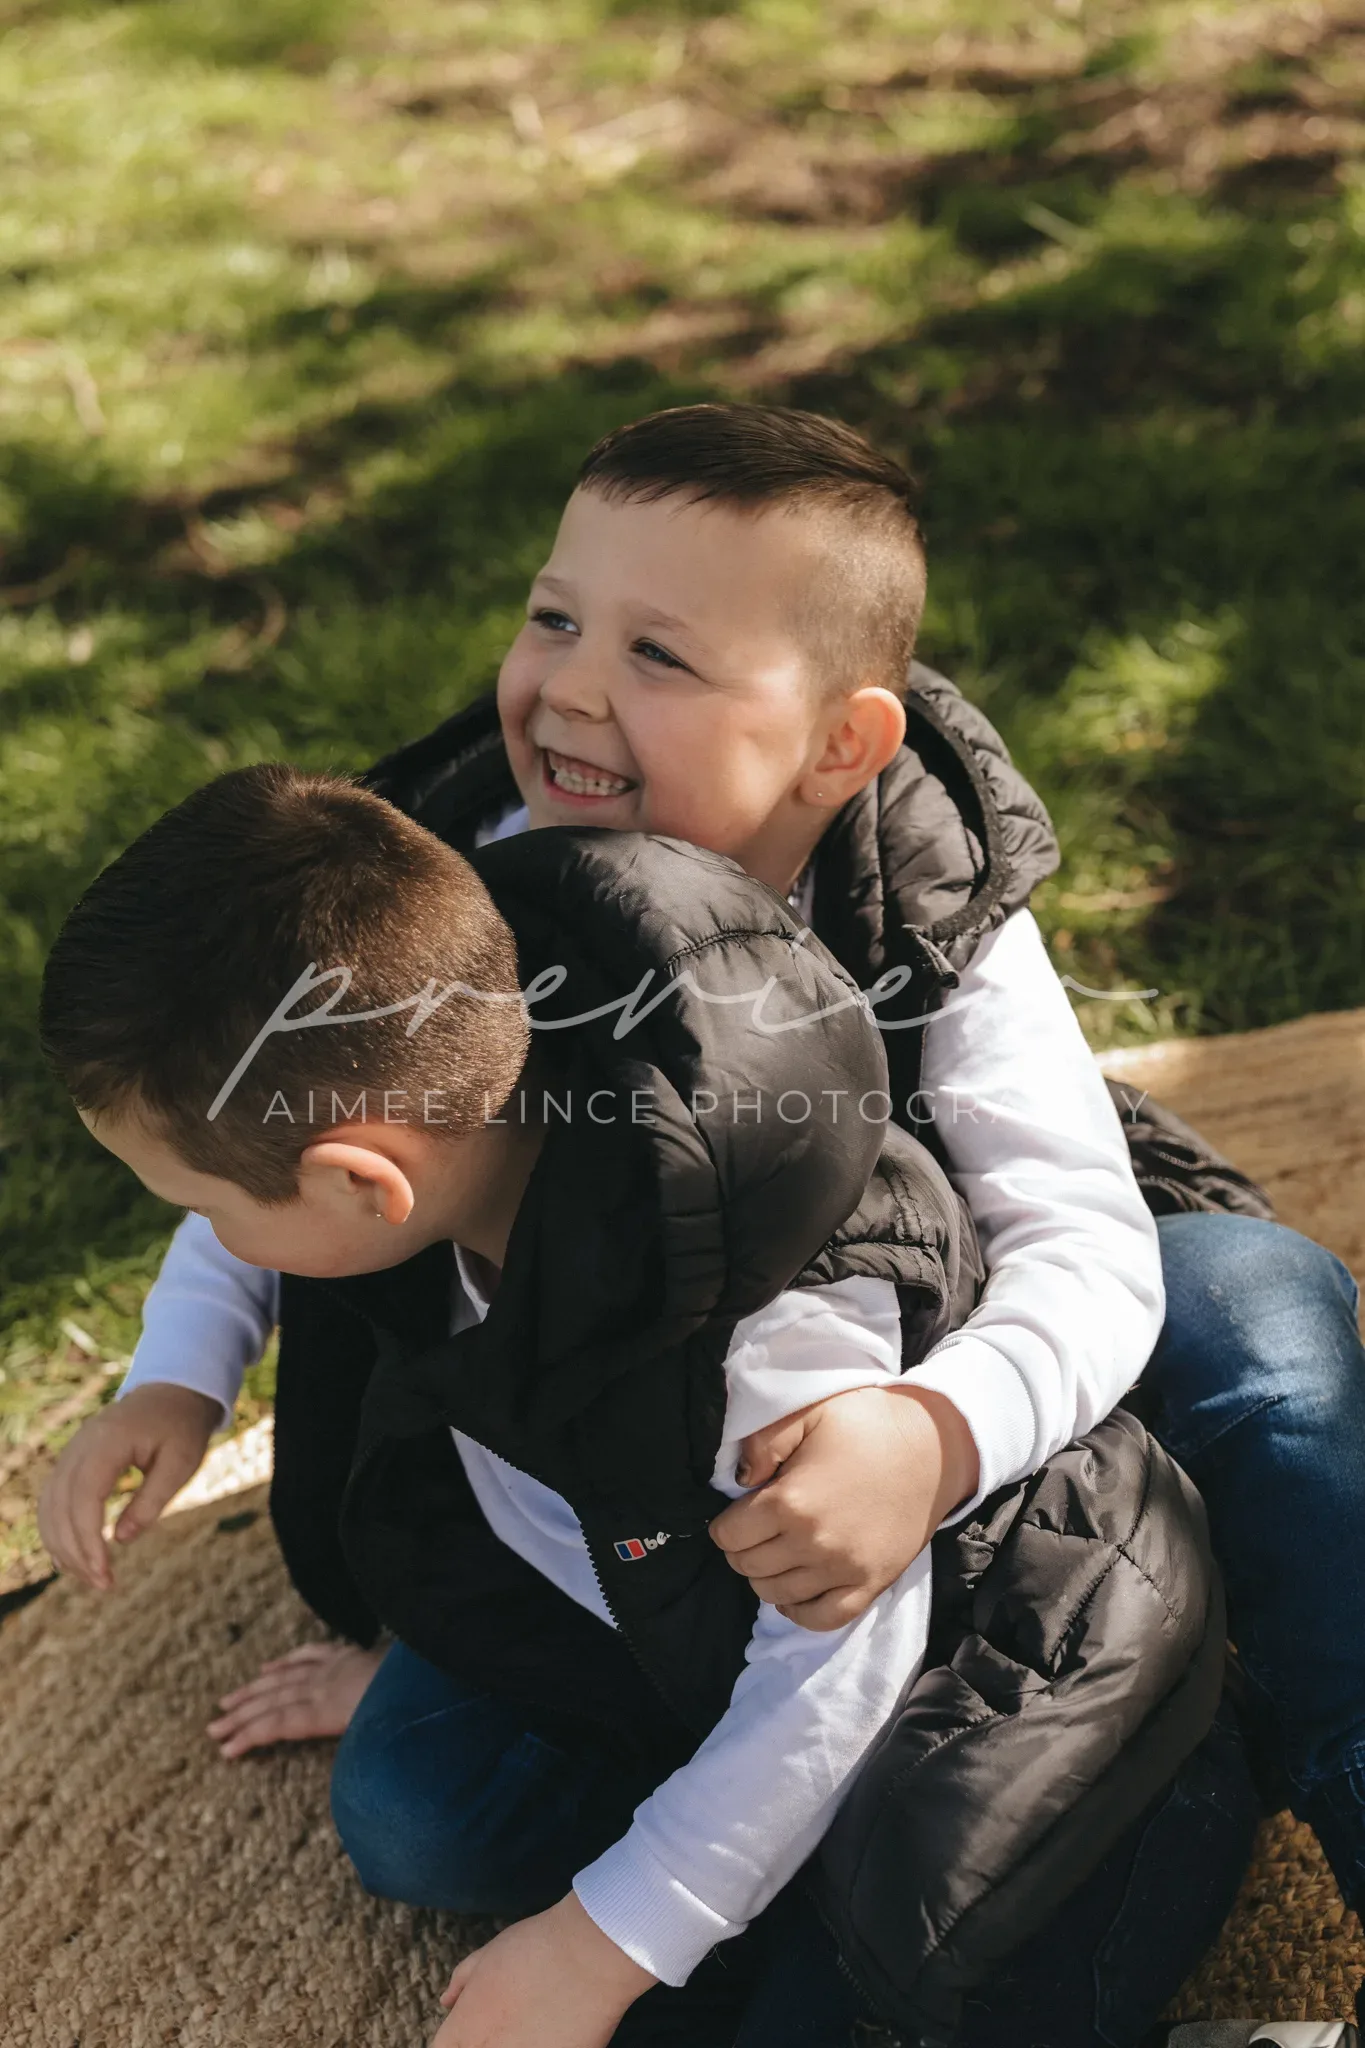 Two young boys laughing joyfully while sitting close together on a log outdoors. both wear dark padded vests over light long-sleeved shirts. the background shows sunlit grass. there's a watermark "aimee vince photography" on the image.